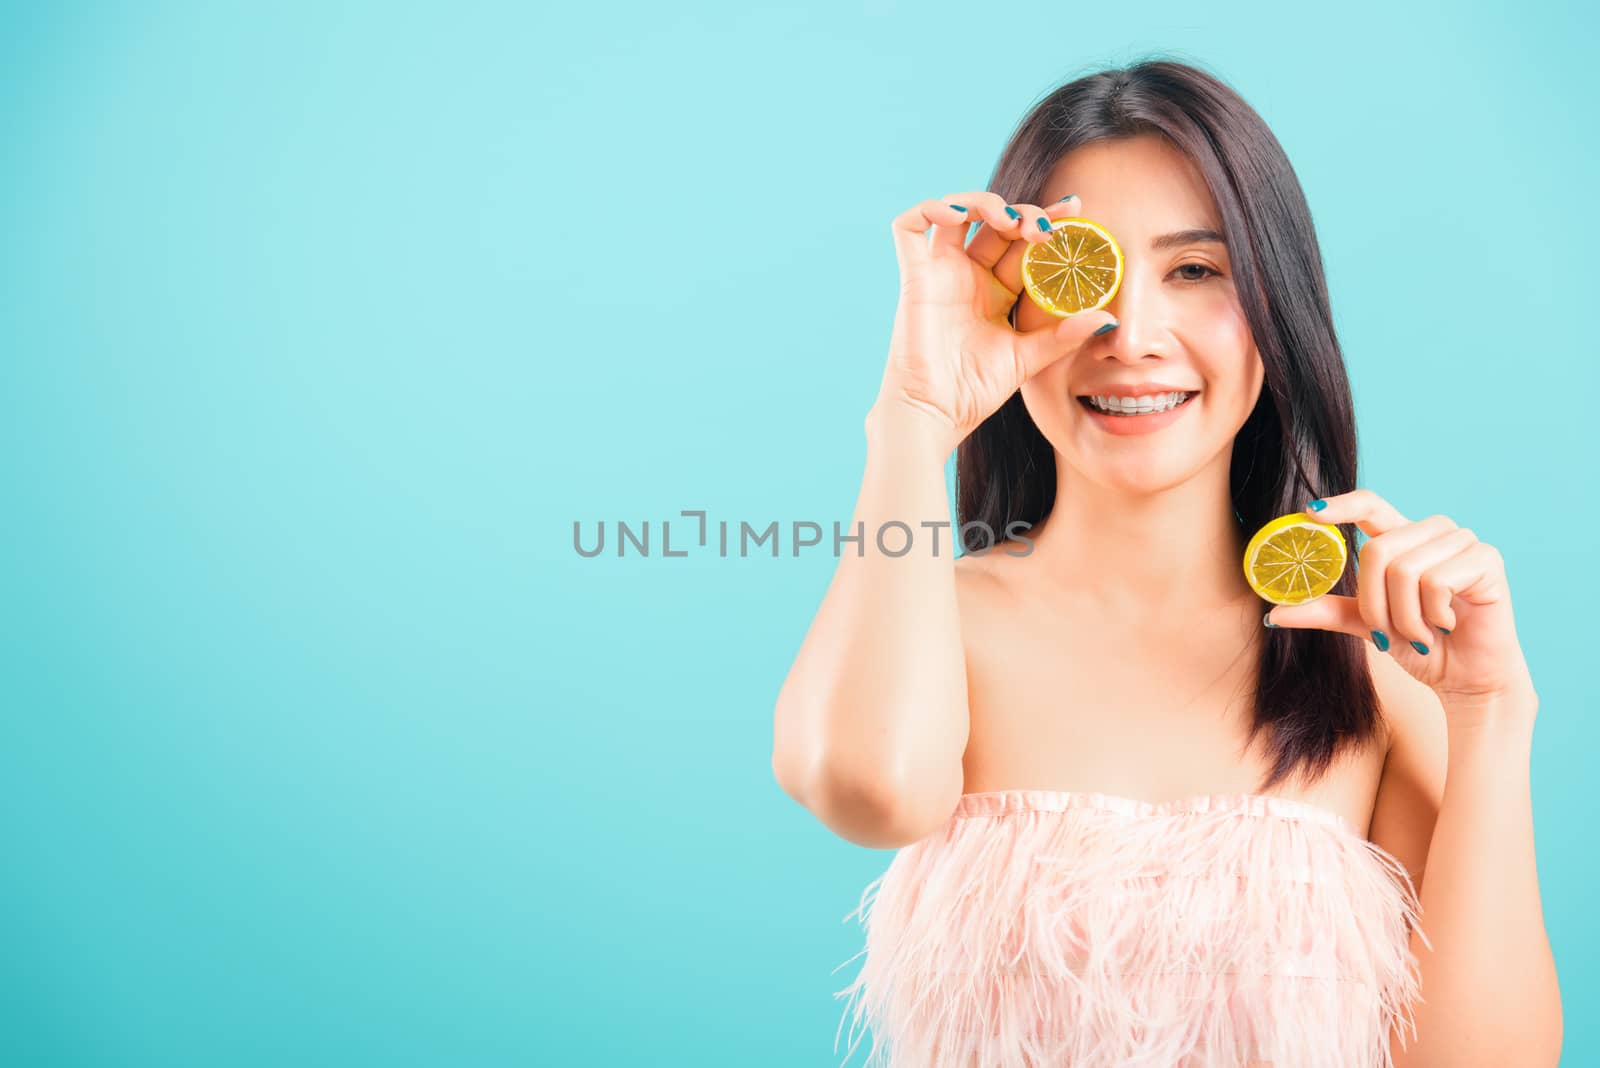 Portrait asian beautiful woman smiling her holding halves of orange on face near eyes on blue background, with copy space for text